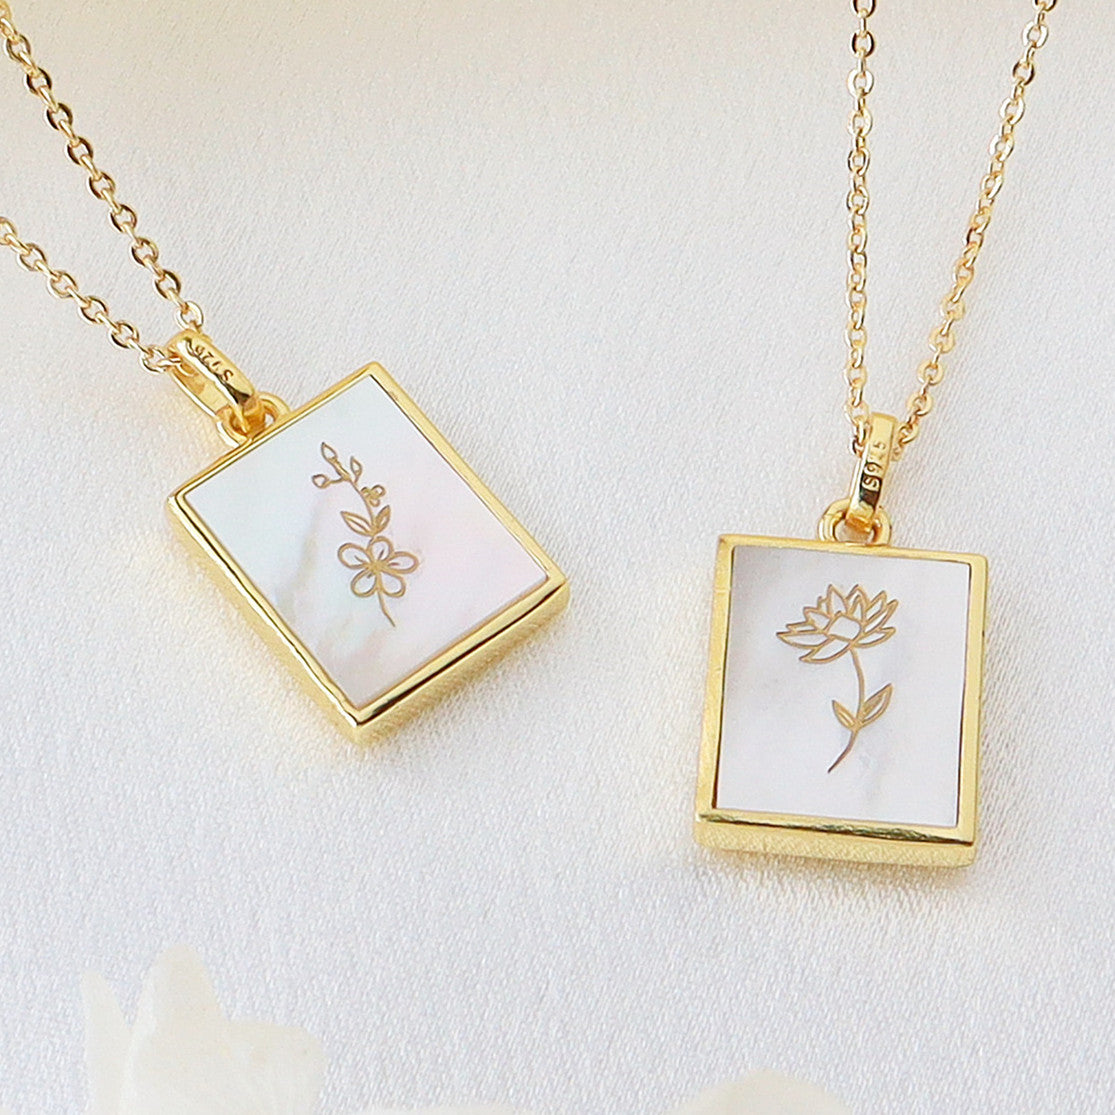 birthflower necklace, white shell necklace, rectangle pendant necklace, gold plated necklace, fashion jewelry, gift for her, gift for women